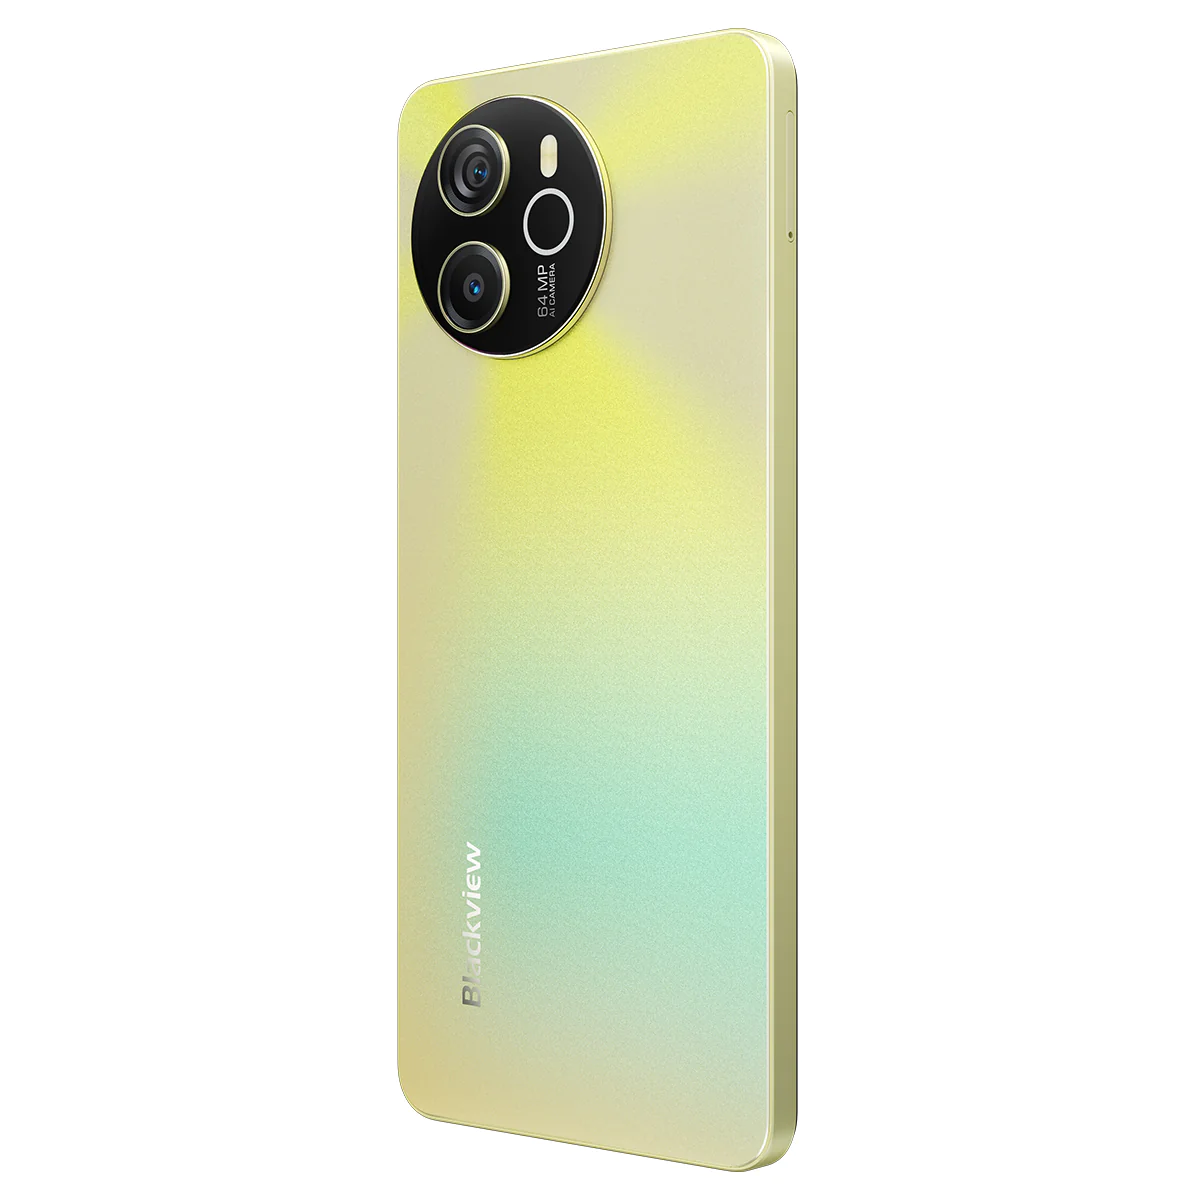 Blackview SHARK 8 is official, and comes in fun color options